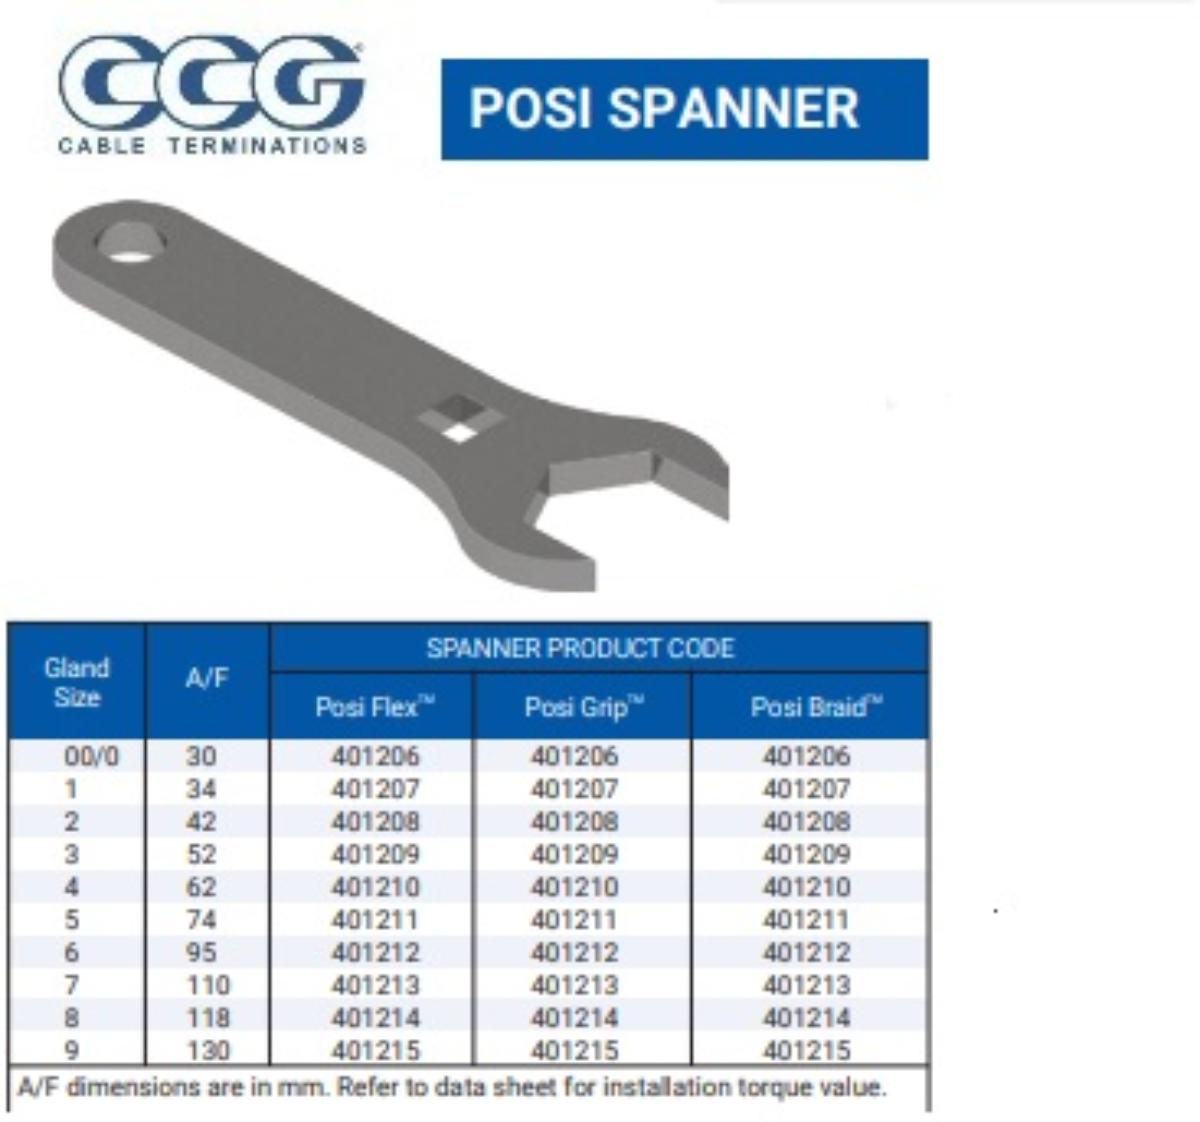 HEX SPANNER SIZE 3 - 42MM